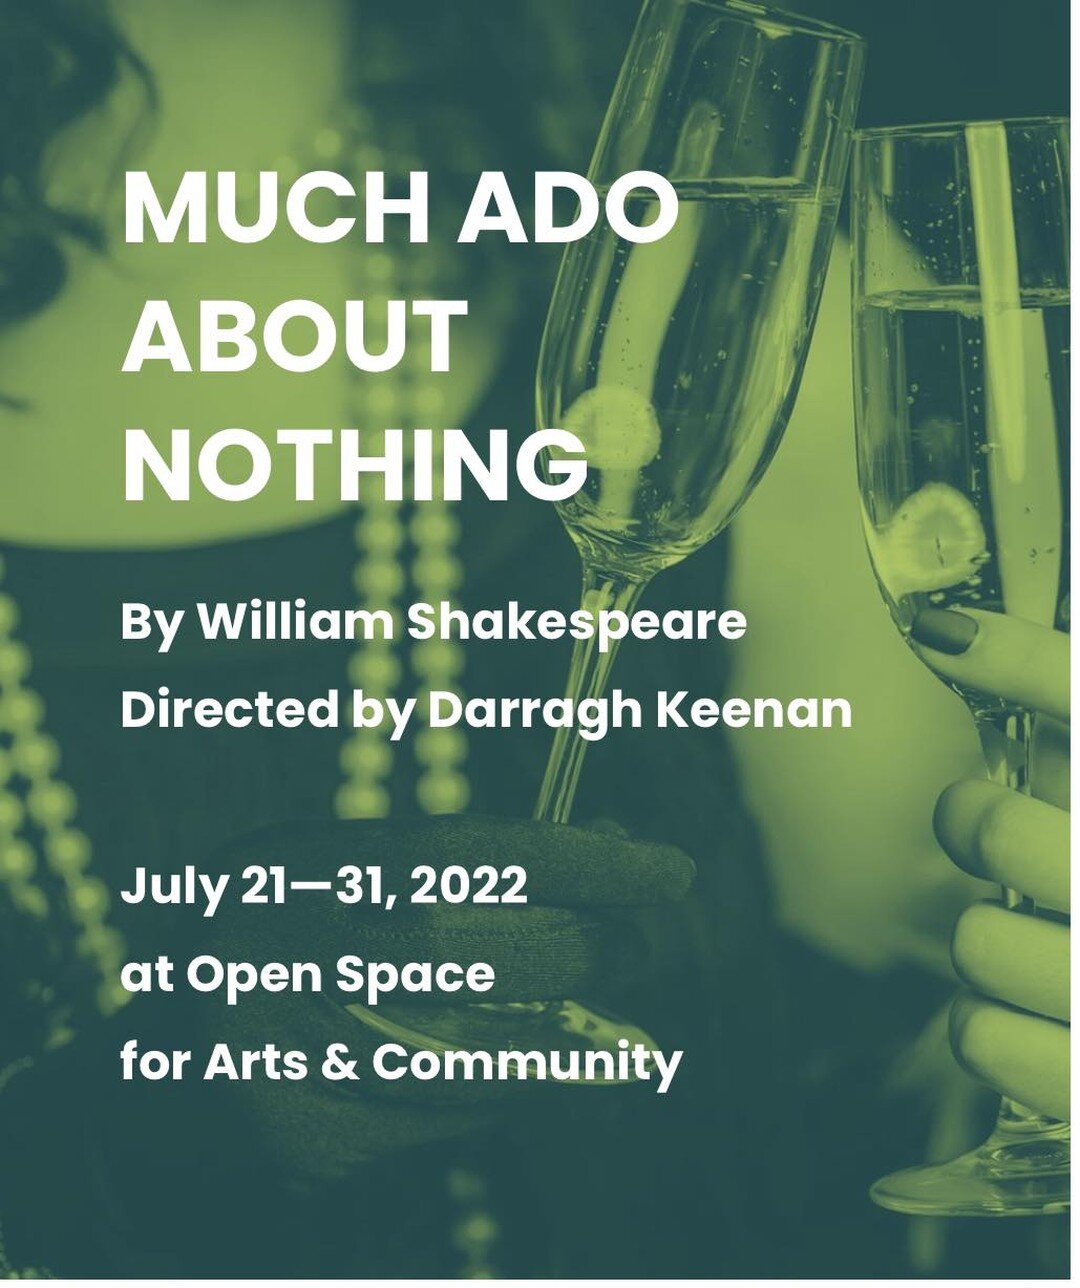 Final weekend starts tonight!
Much Ado About Nothing, part of Vashon Theatre Fest

By William Shakespeare
Directed by Darragh Kennan

In this popular Shakespearean comedy, the war is over. Pedro Prince of Aragon, with his followers Benedick and Claud